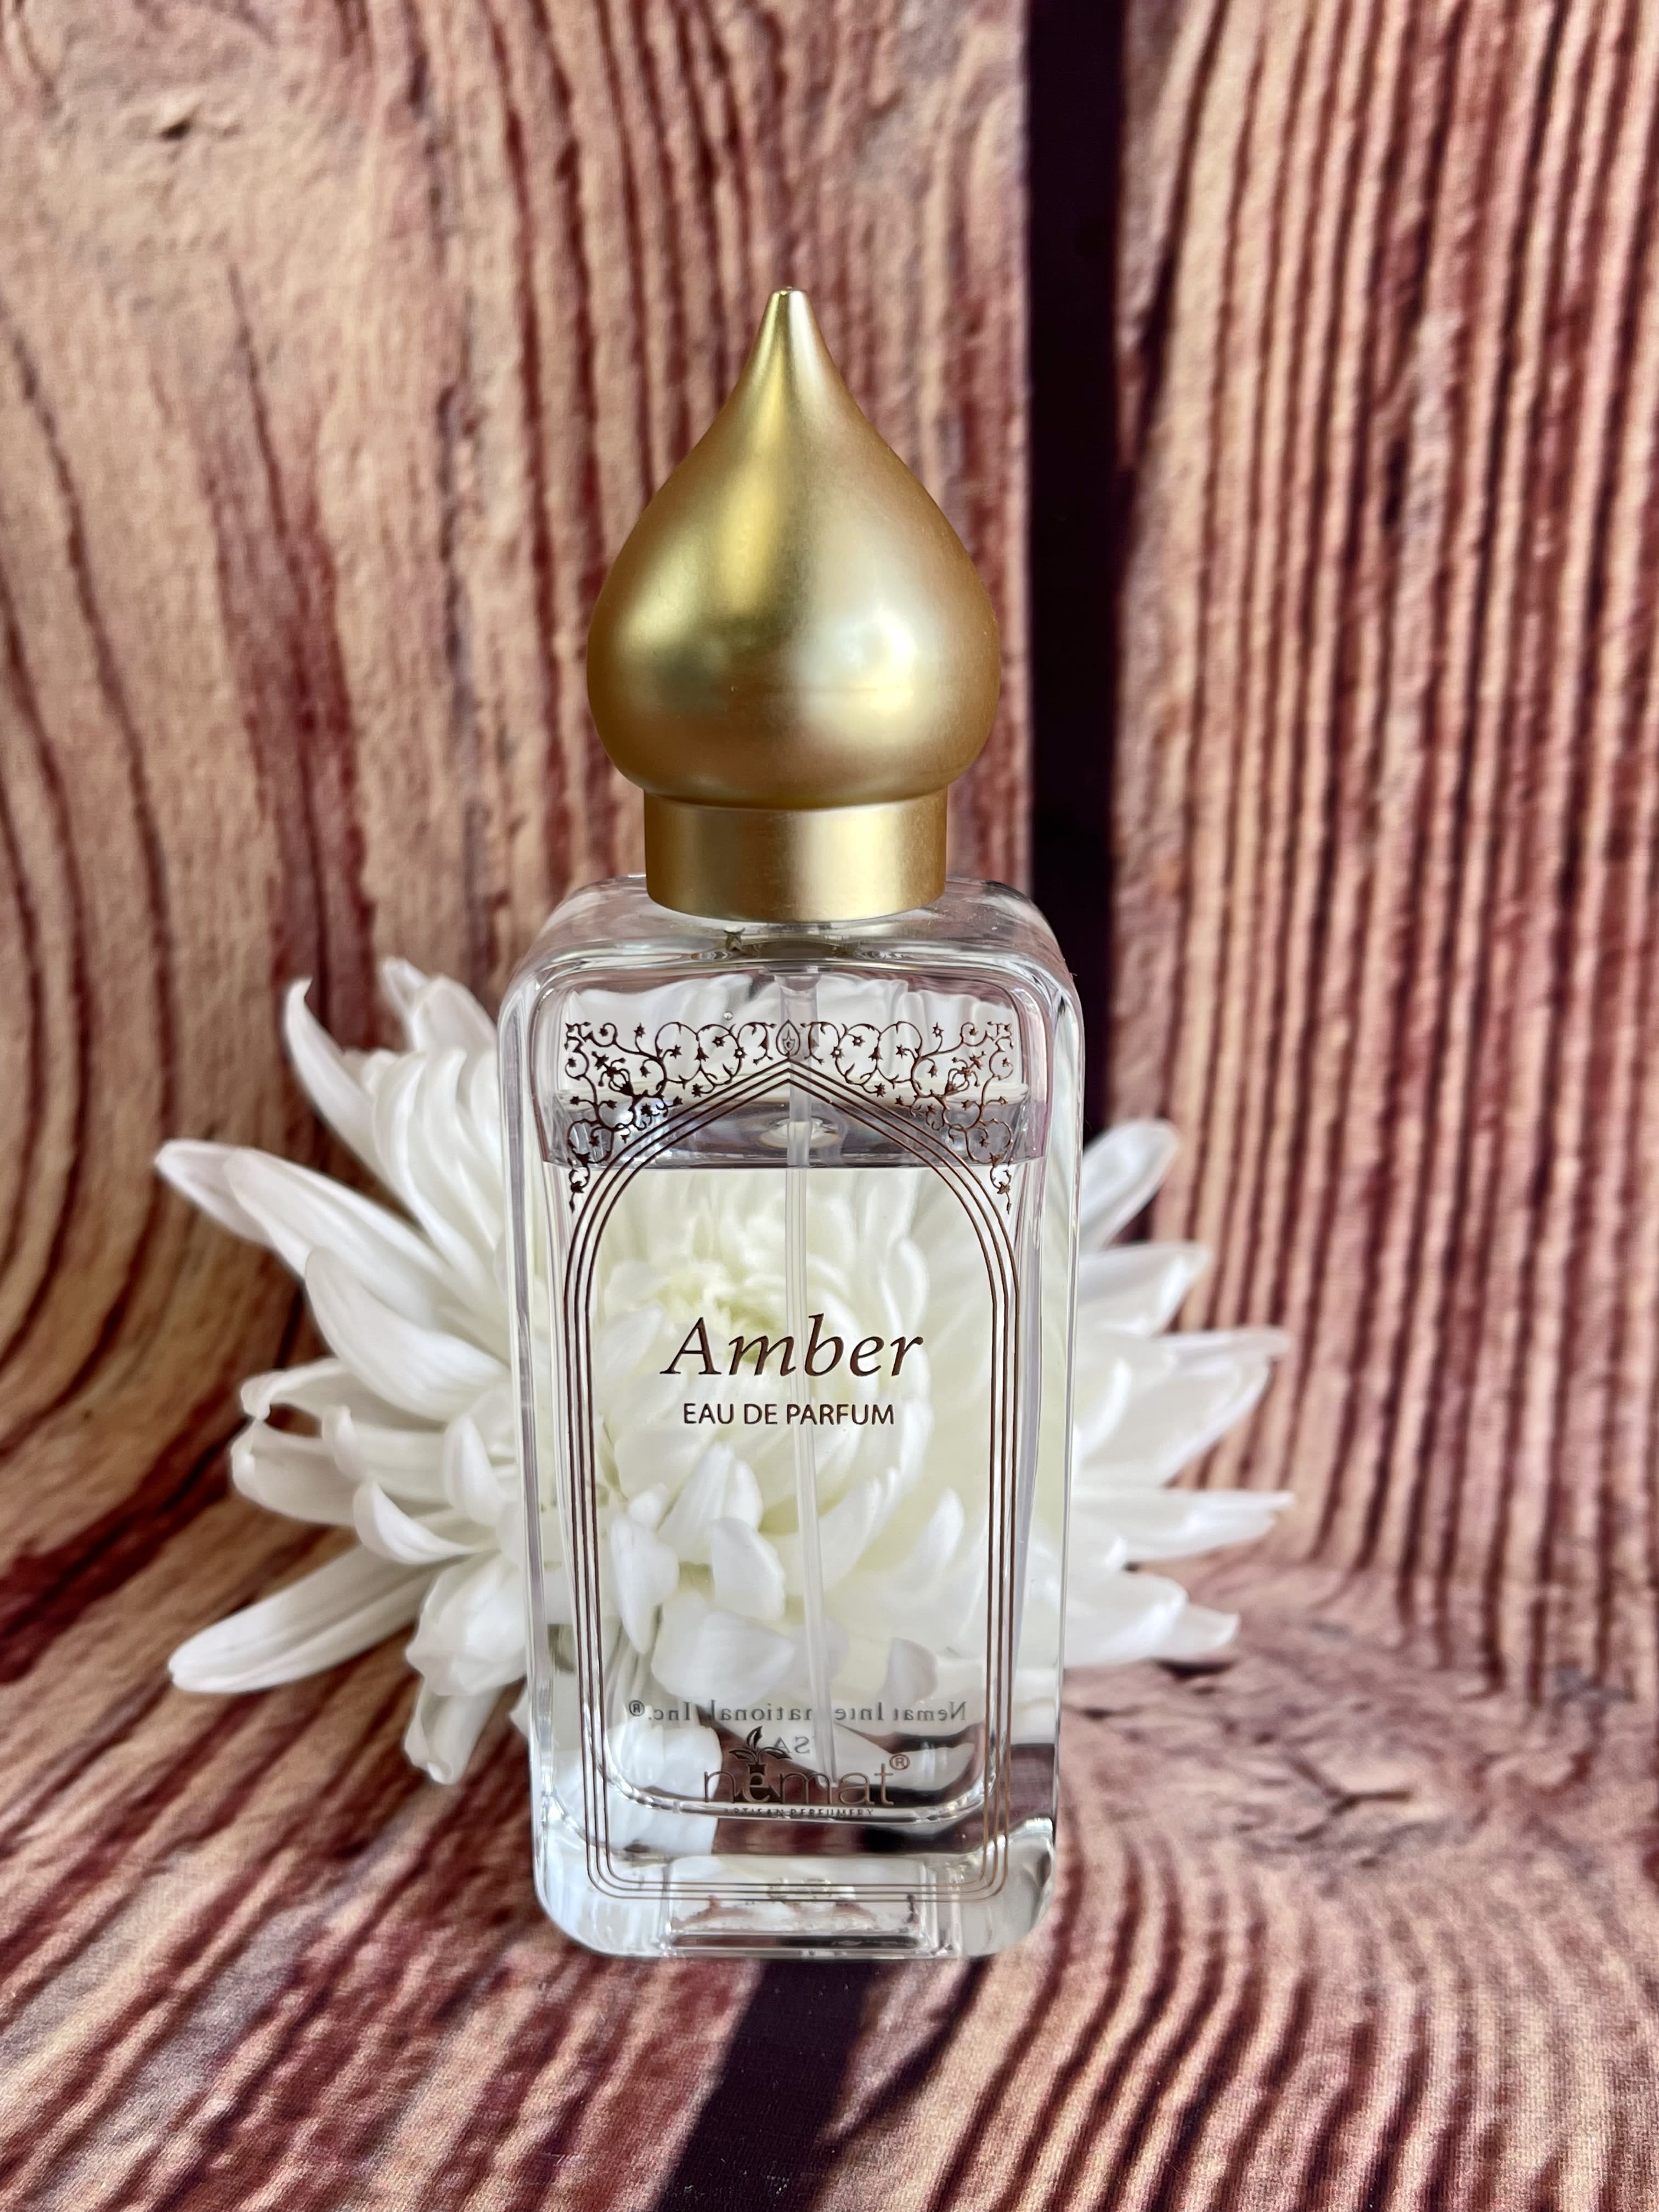 Amber (Nemat Artisan Perfumery) by Flowers & More by Dean